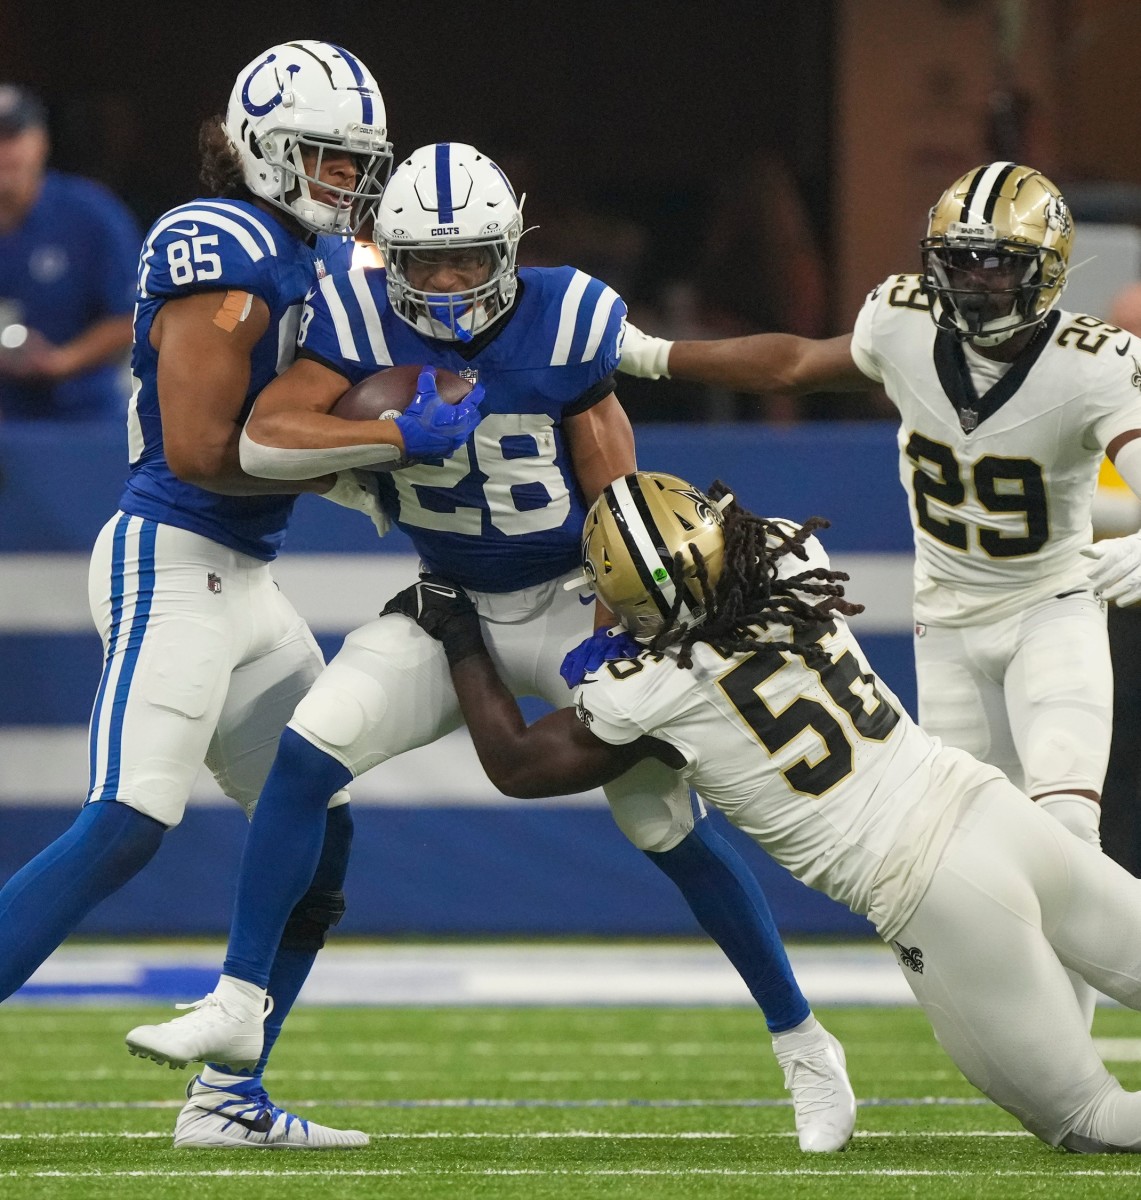 Indianapolis Colts running back Jonathan Taylor (28) is brought down by New Orleans Saints linebacker Demario Davis (56). © Robert Scheer/IndyStar / USA TODAY NETWORK